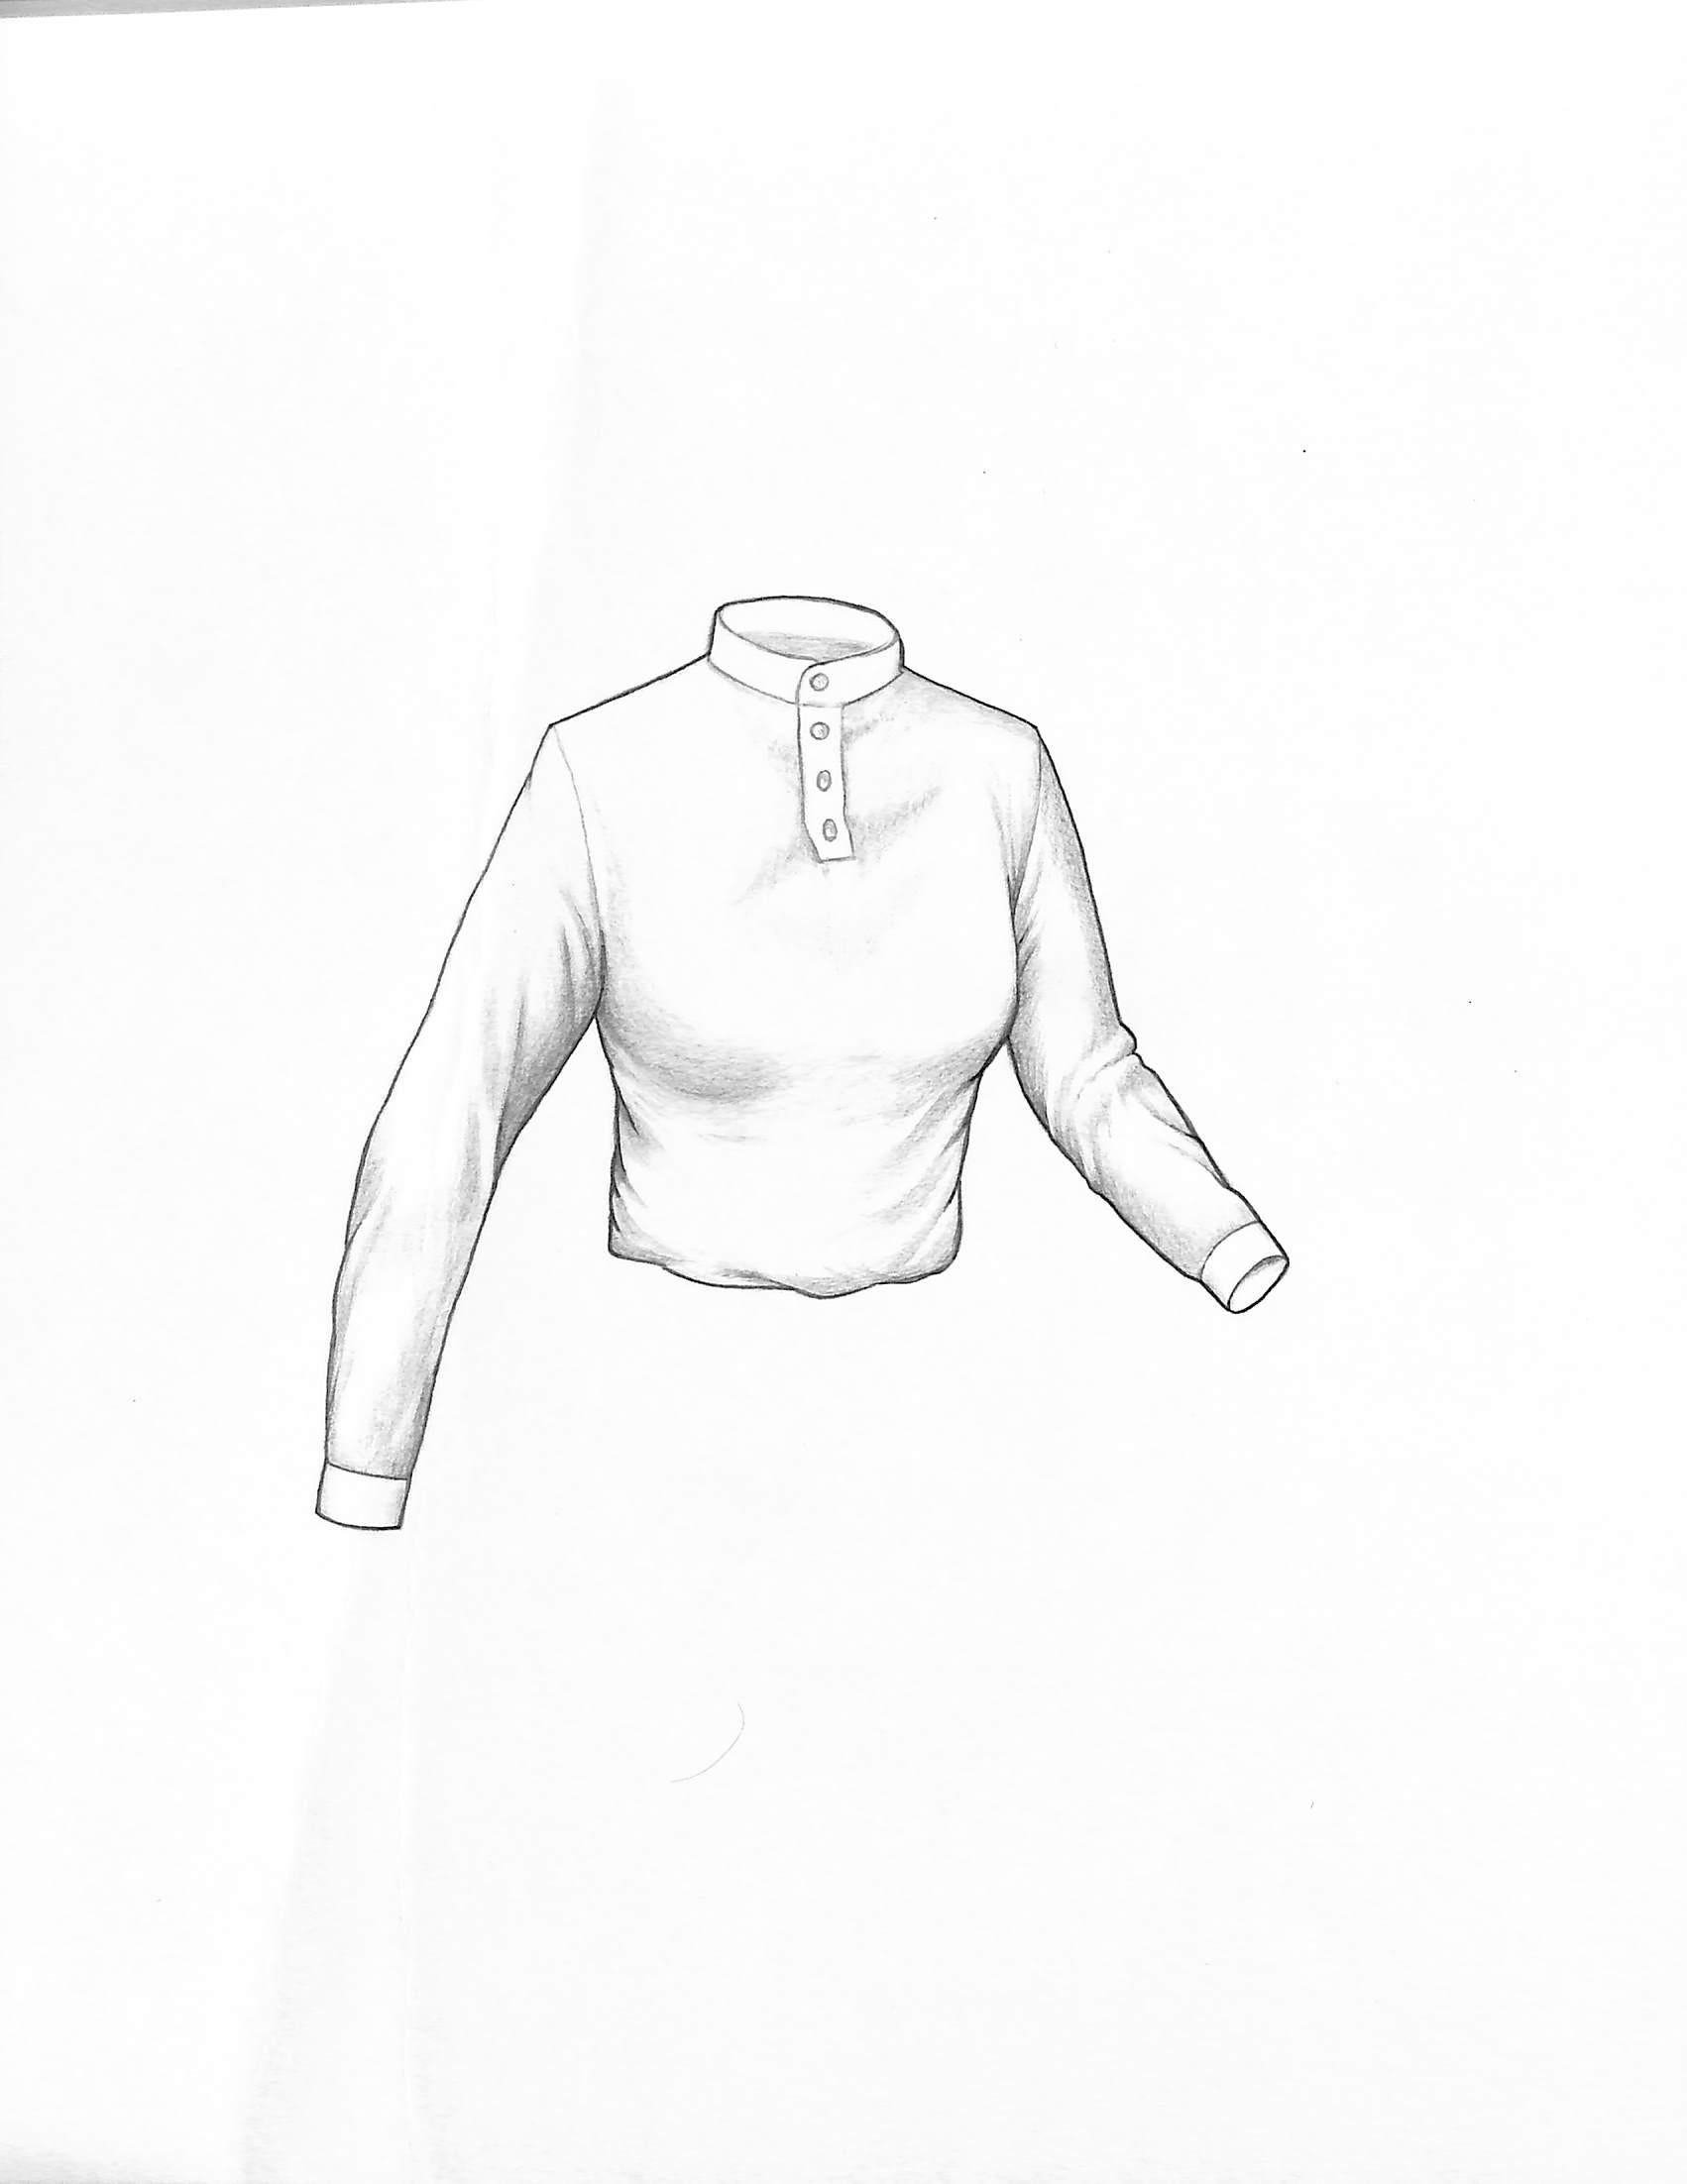 Ladies Ascot Shirt Graphite Drawing - Art by Unknown